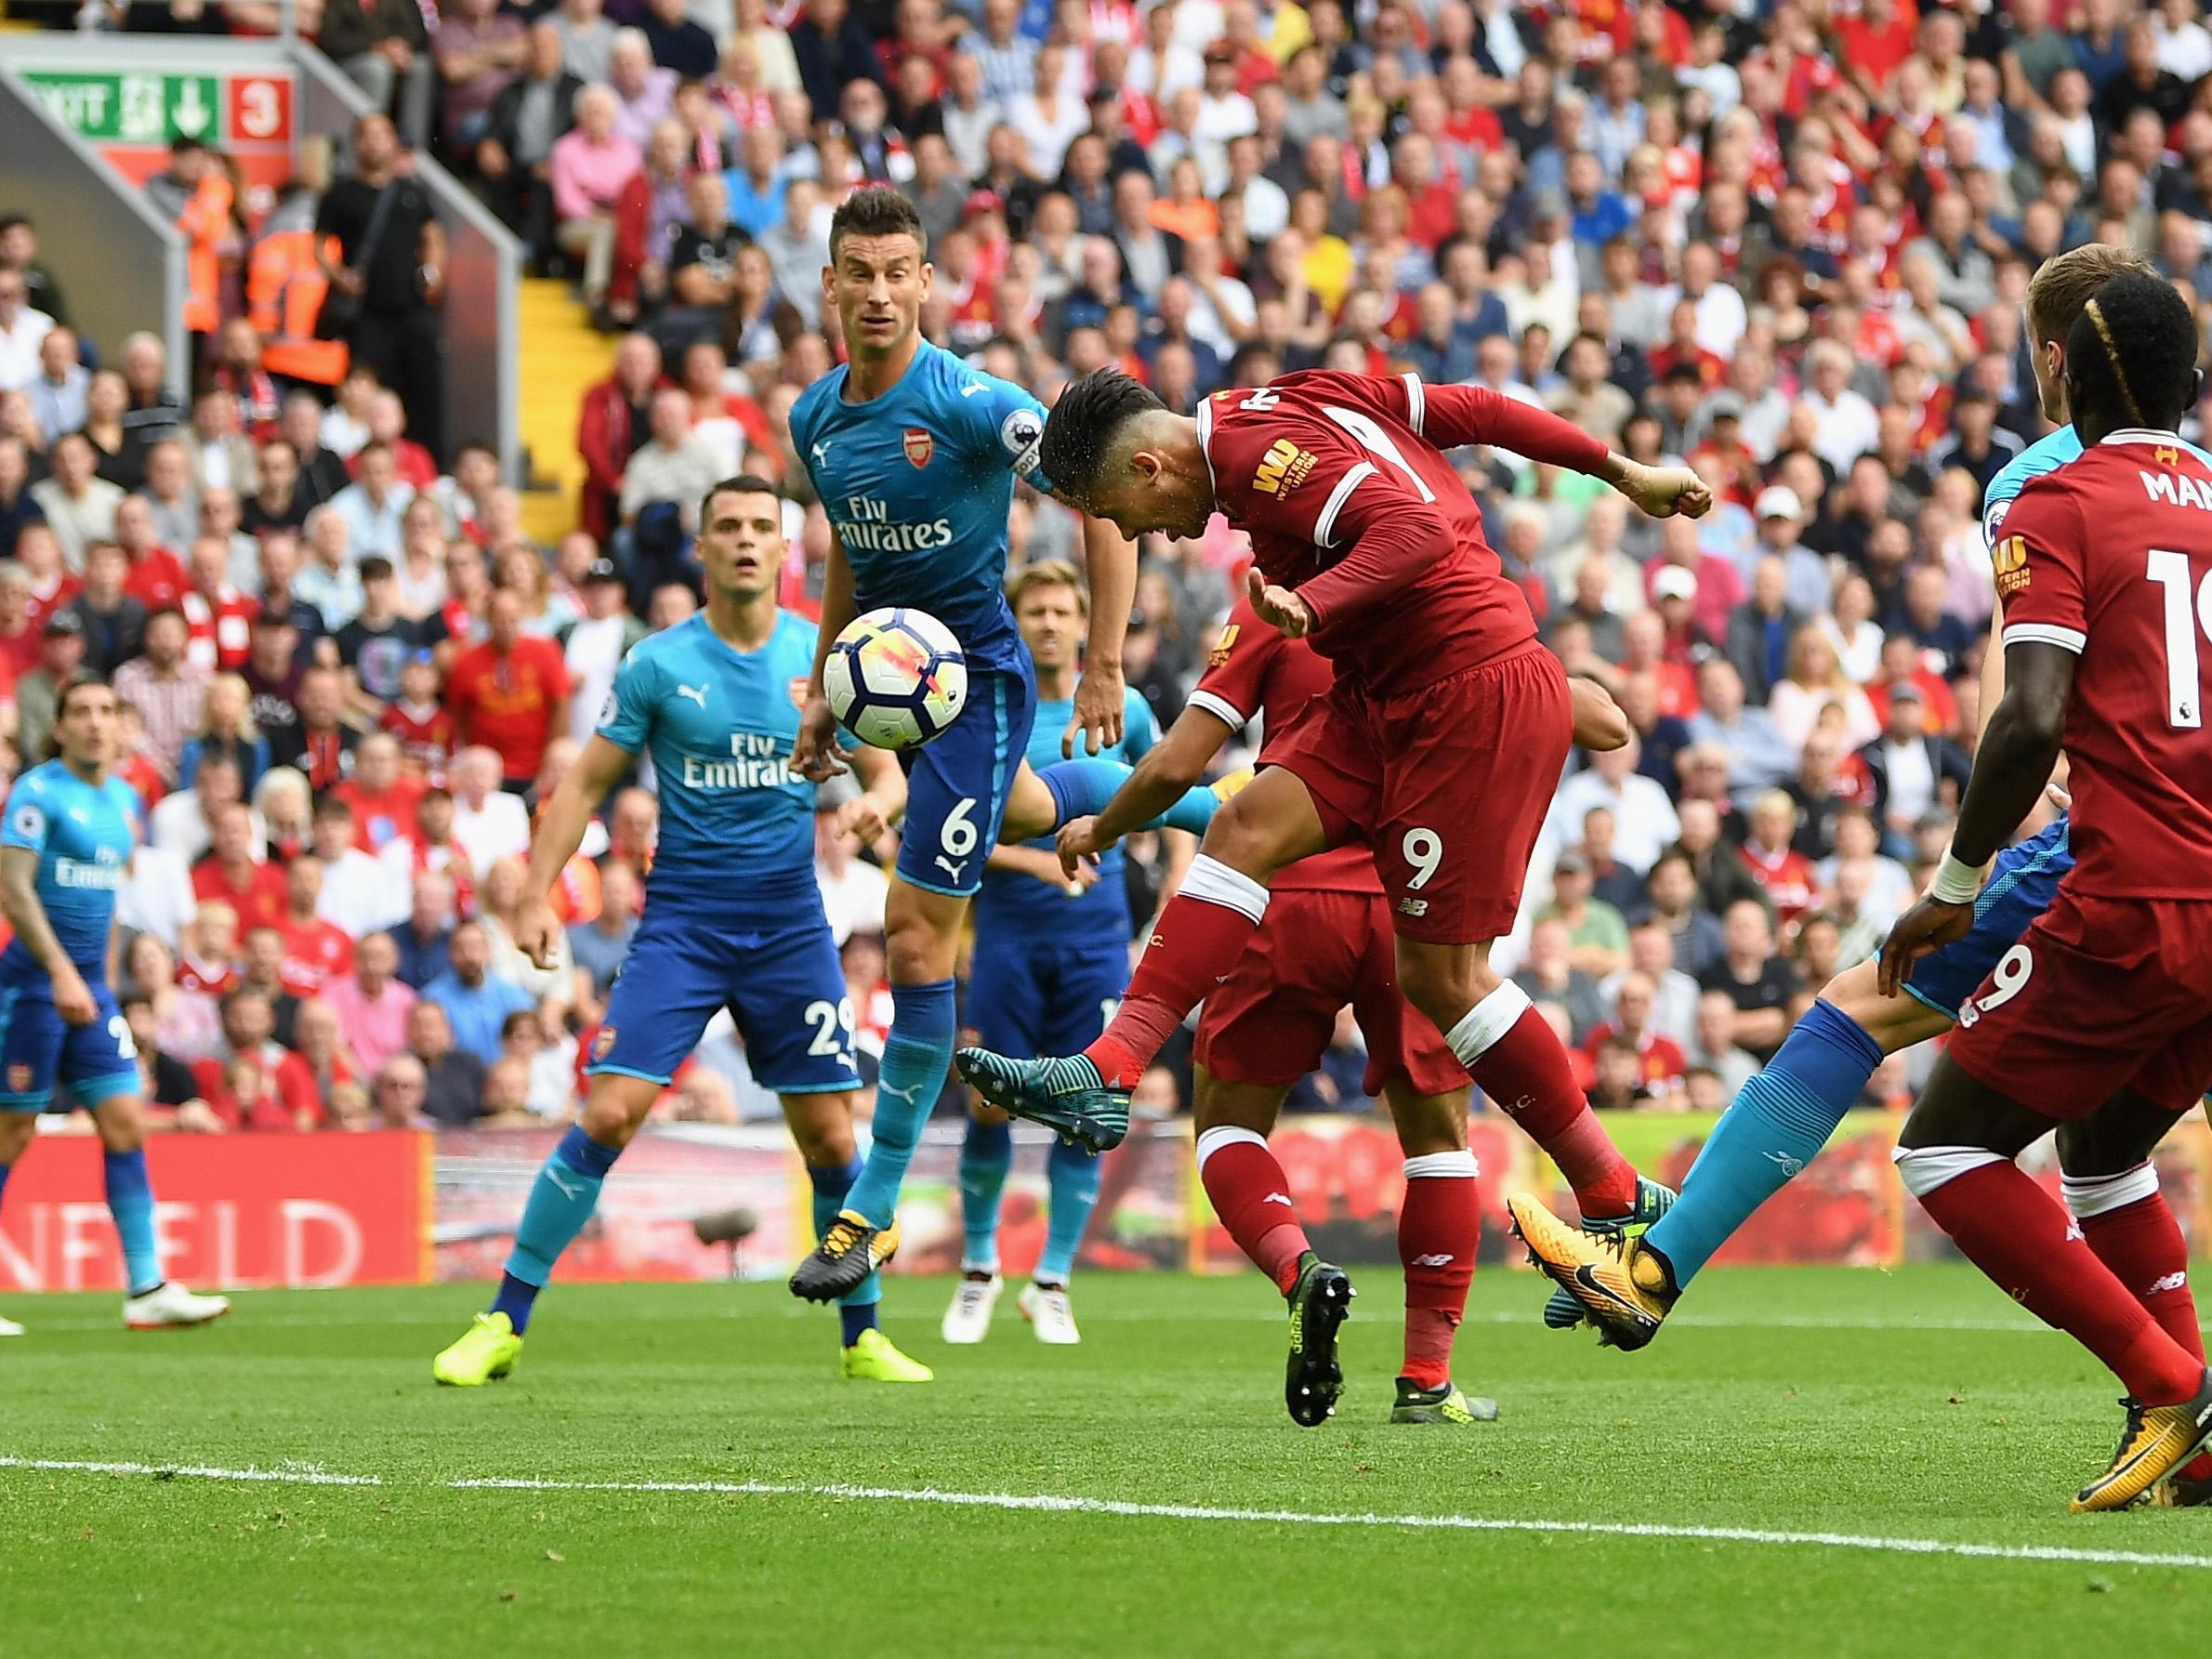 Liverpool won 3-1 in their last meeting with Arsenal